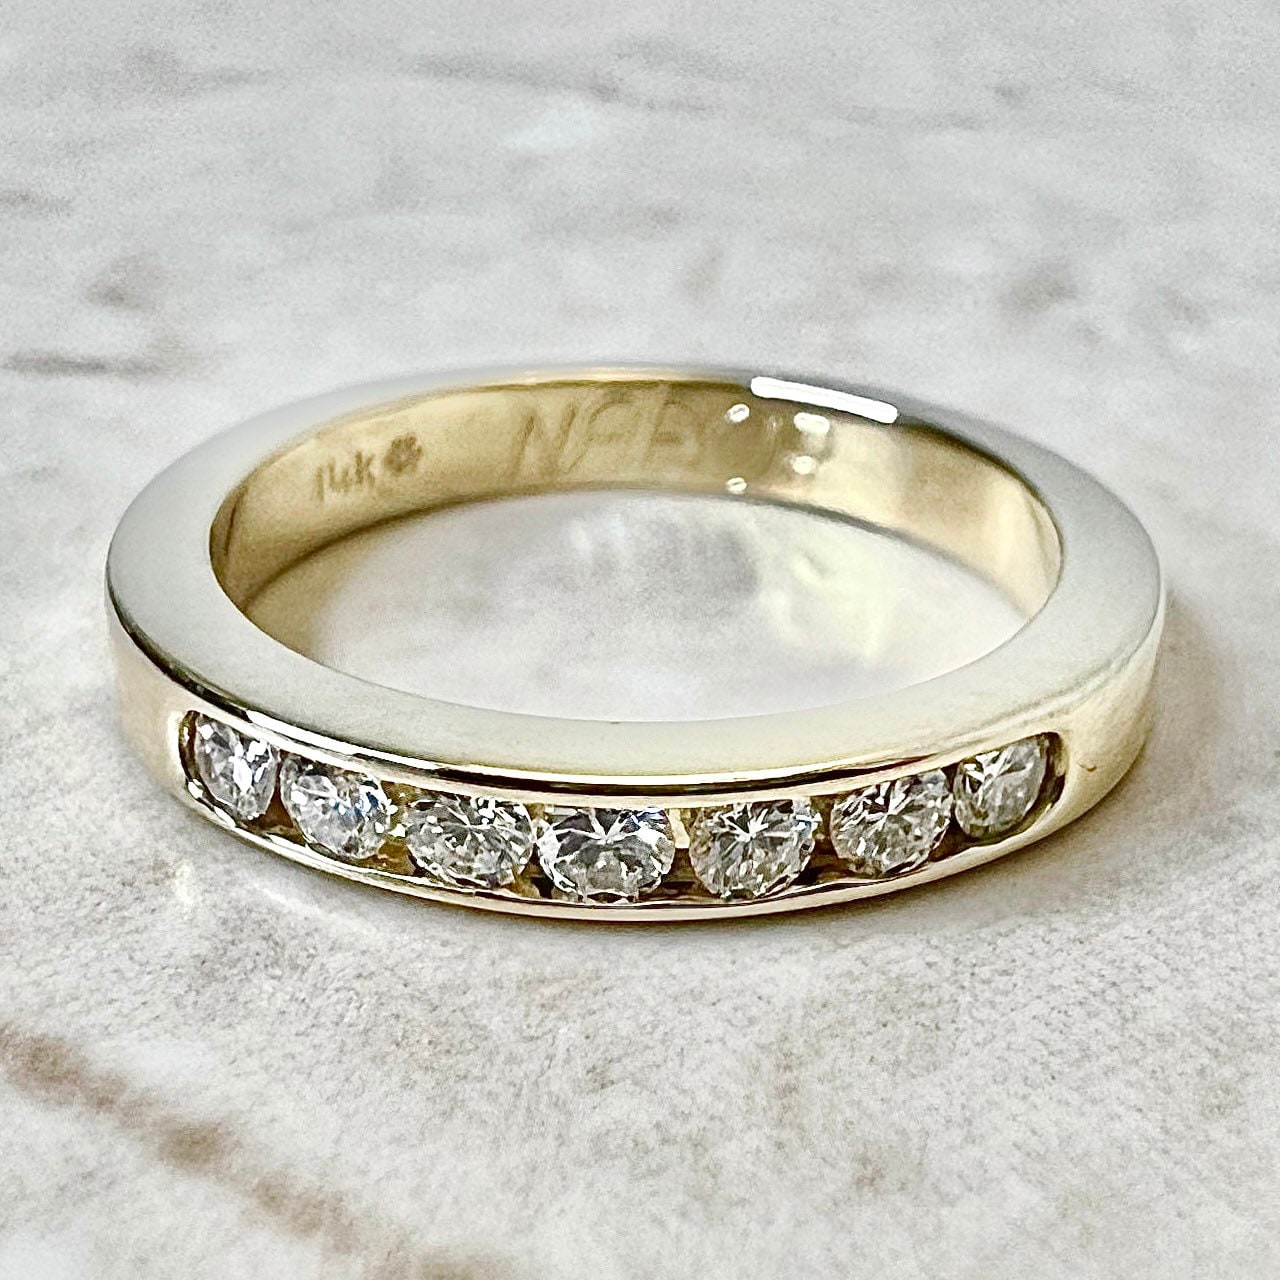 14K 7 Stone Eternity Diamond Band Ring 0.20 CTTW - Yellow Gold Eternity Ring - Anniversary Ring - Wedding Ring - Size 4.75 US - Holiday Gift